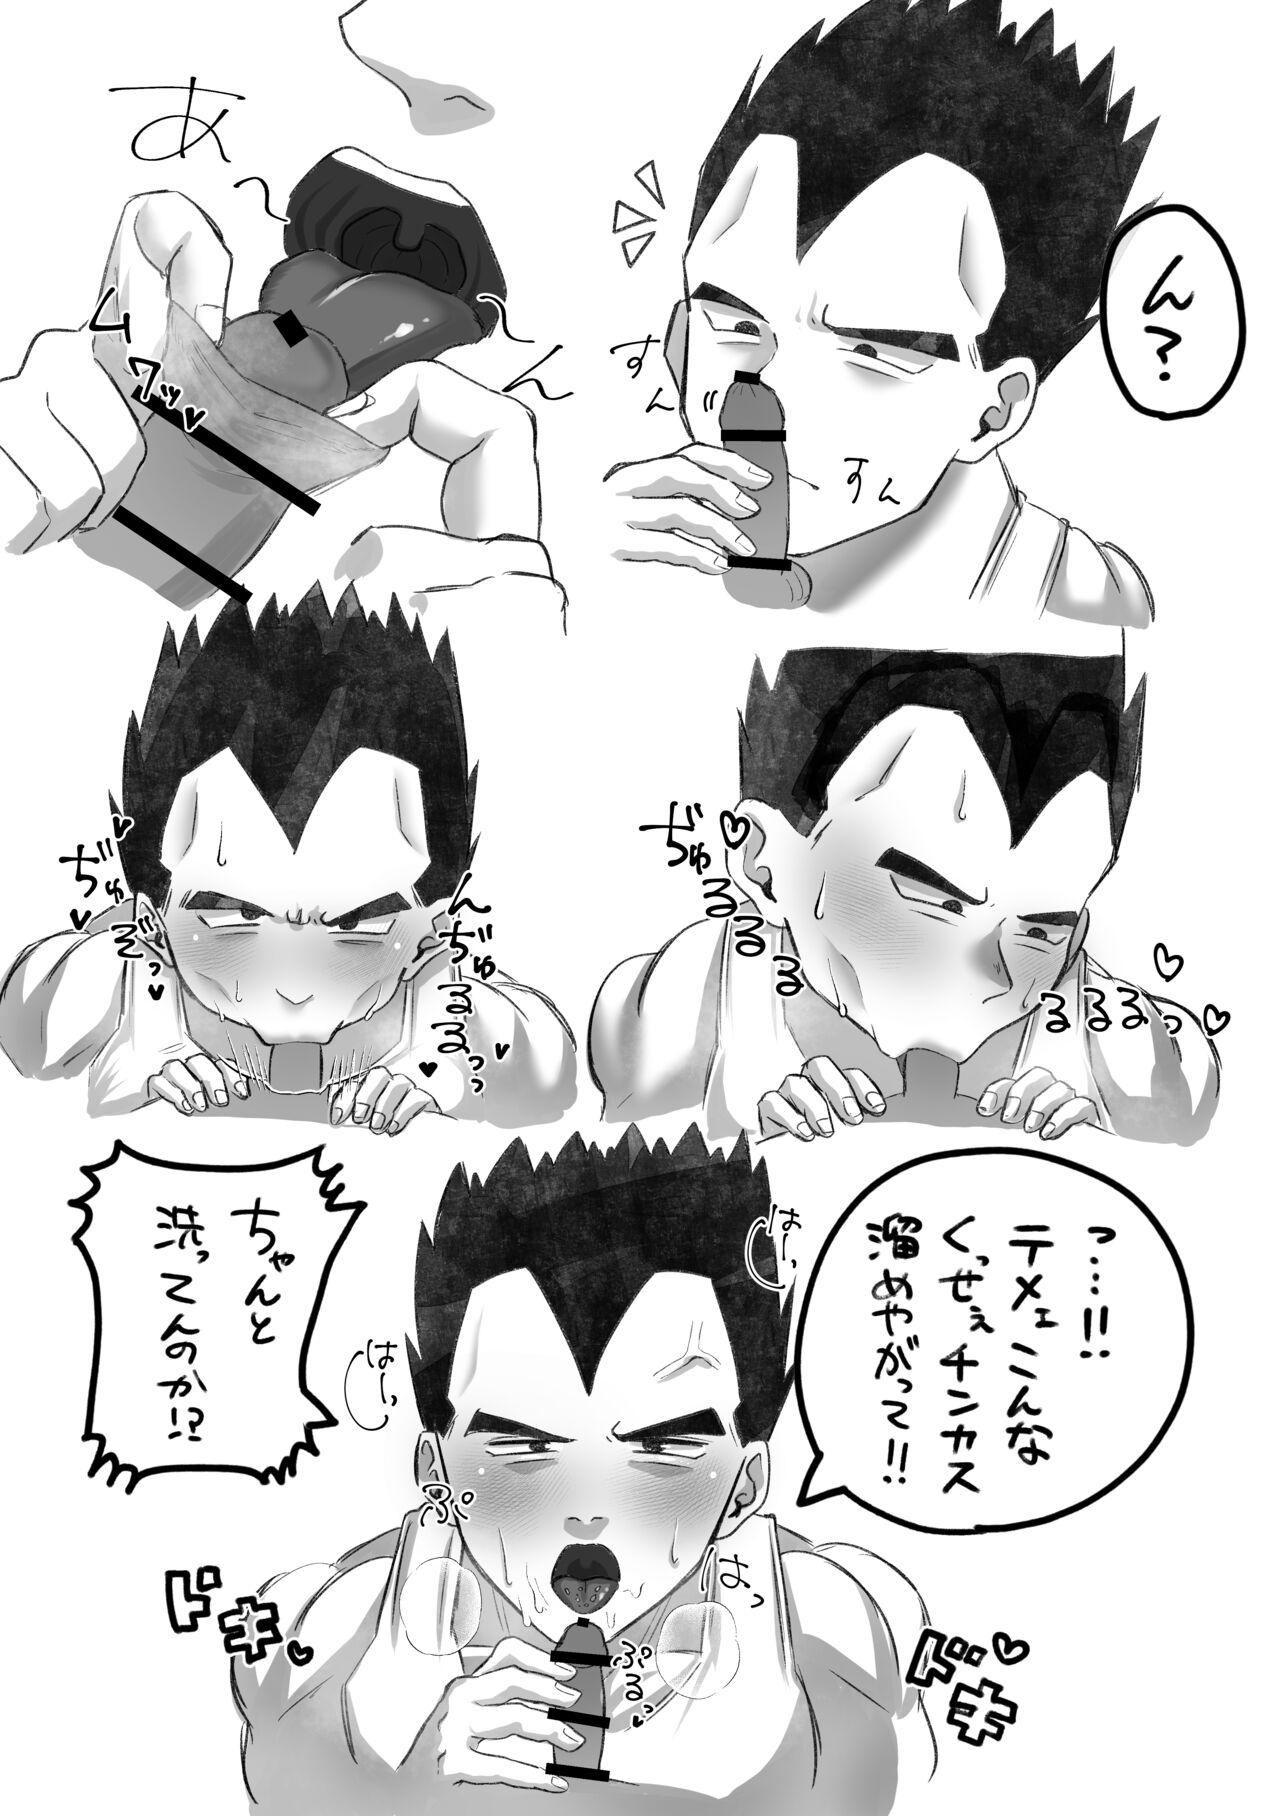 Relax GT no Dosukebe na KakaVege - Dragon ball gt Gay Shorthair - Page 5